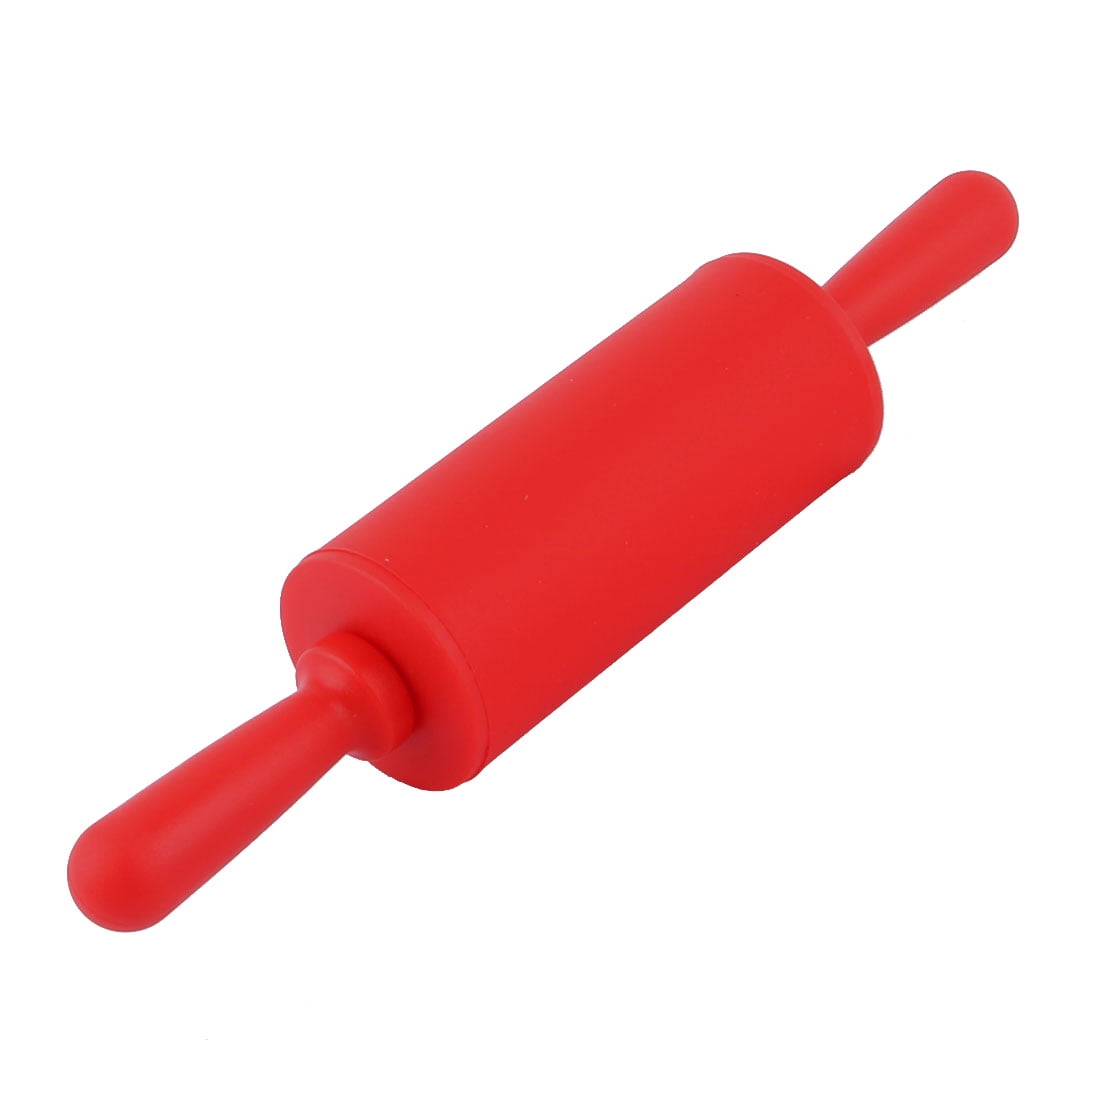 Details about   Restaurant Silicone Surface Dumpling Pastry Making Tool Dough Rolling Pin Red 